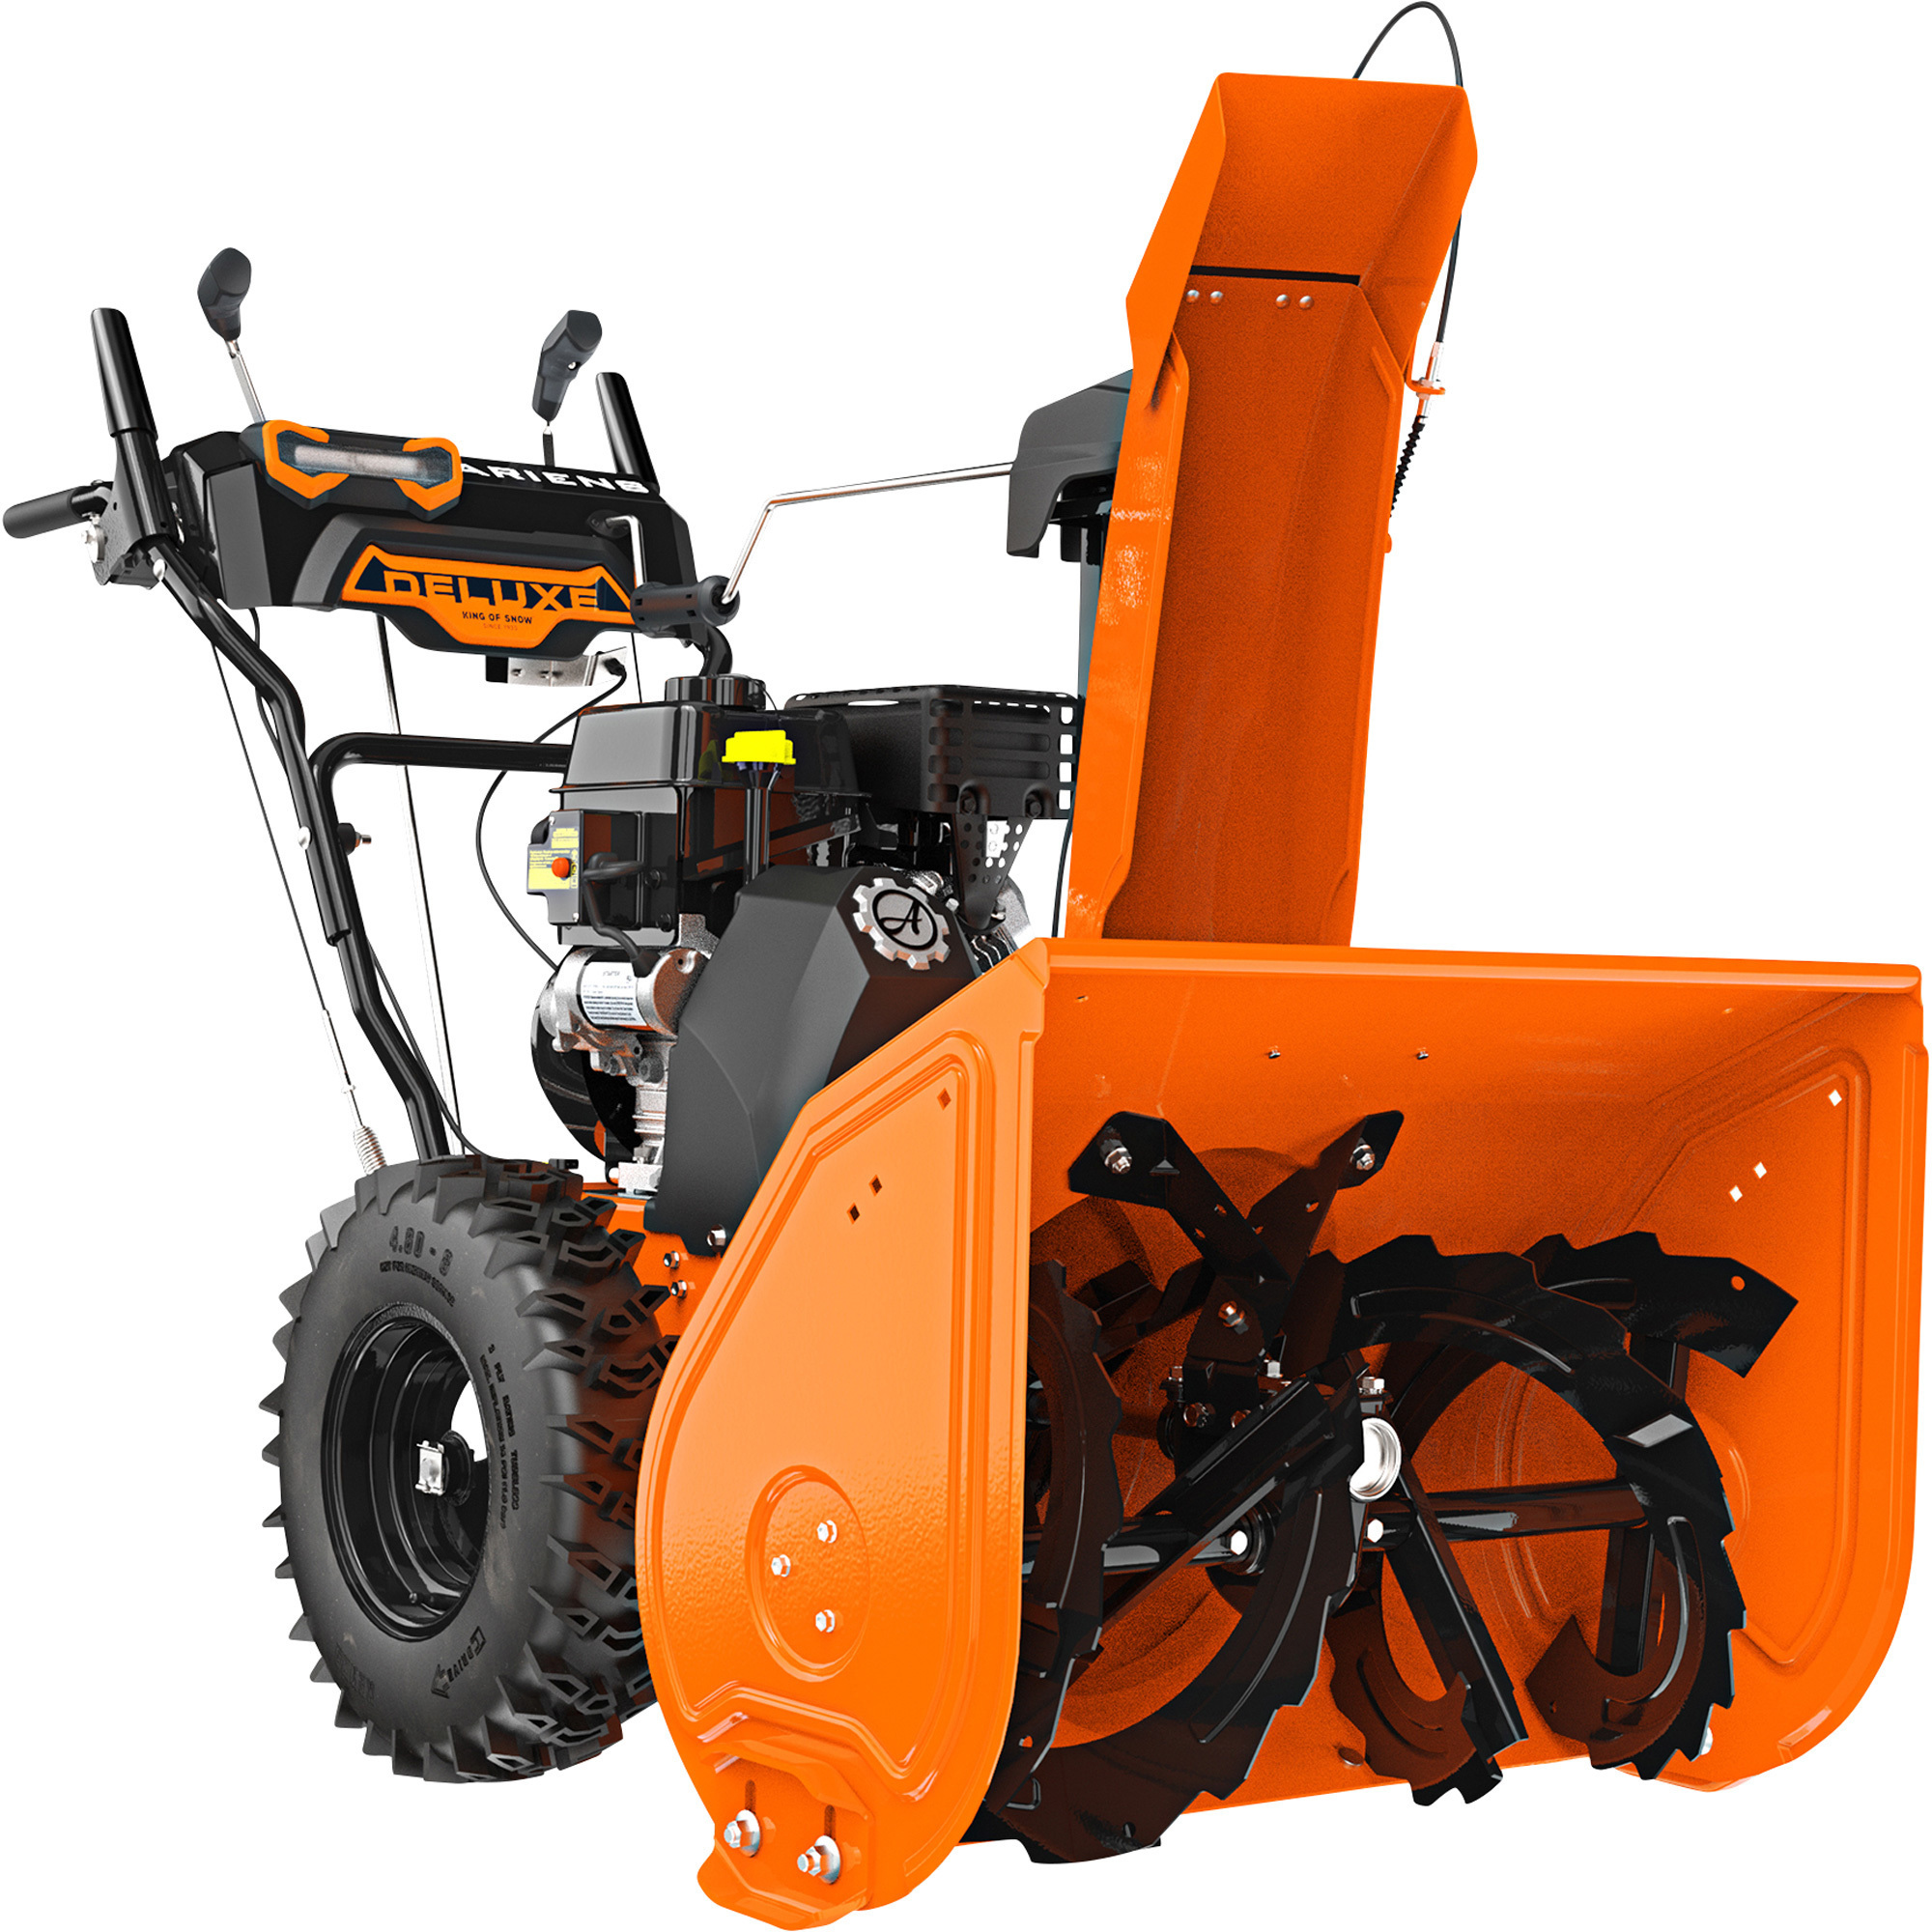 Ariens Deluxe 28 2-Stage Self-Propelled Snow Blower with Electric Start, 28Inch, 254cc, Model 921046